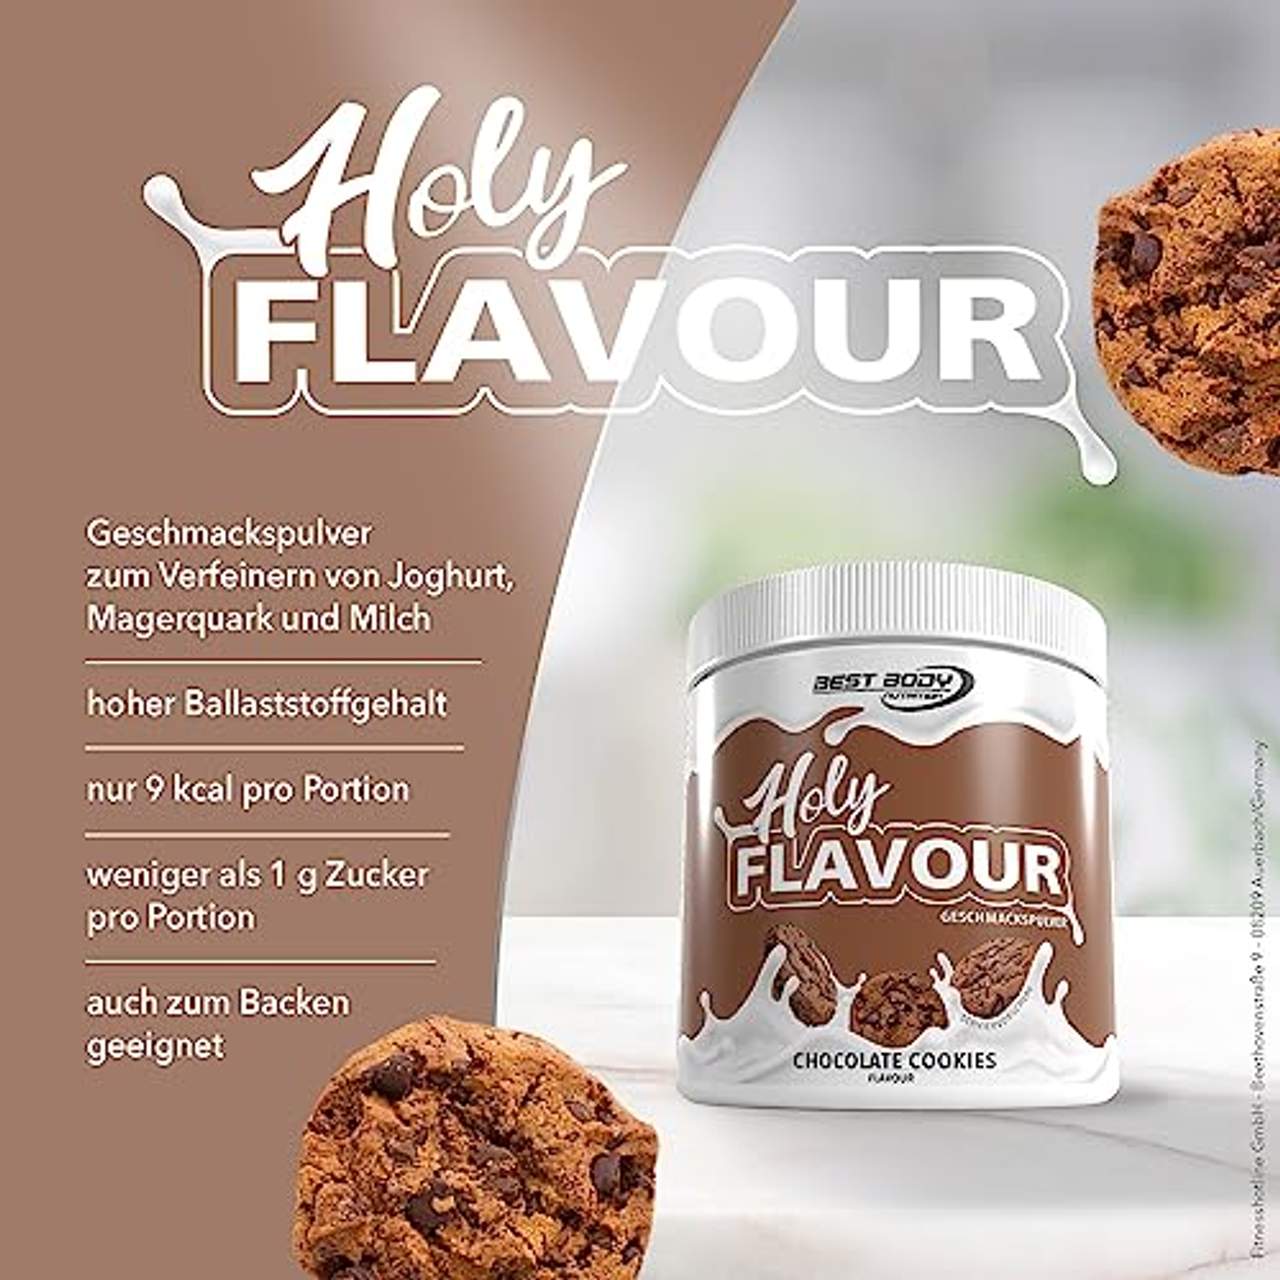 Best Body Nutrition Holy Flavour